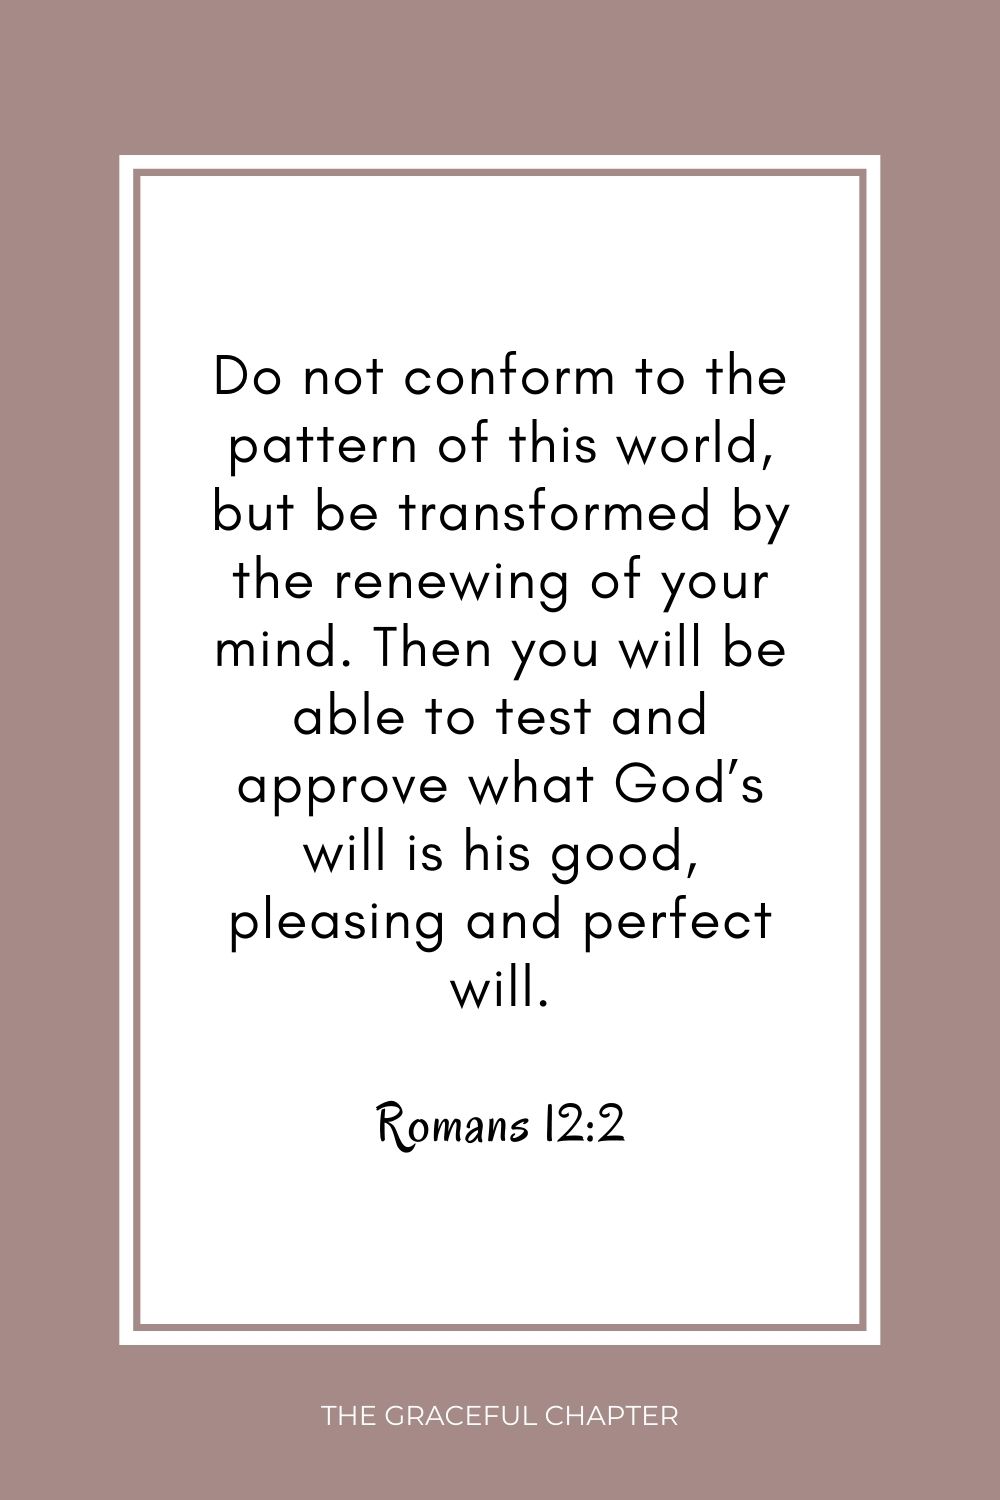 Do not conform to the pattern of this world, but be transformed by the renewing of your mind. Then you will be able to test and approve what God’s will is his good, pleasing and perfect will. Romans 12:2